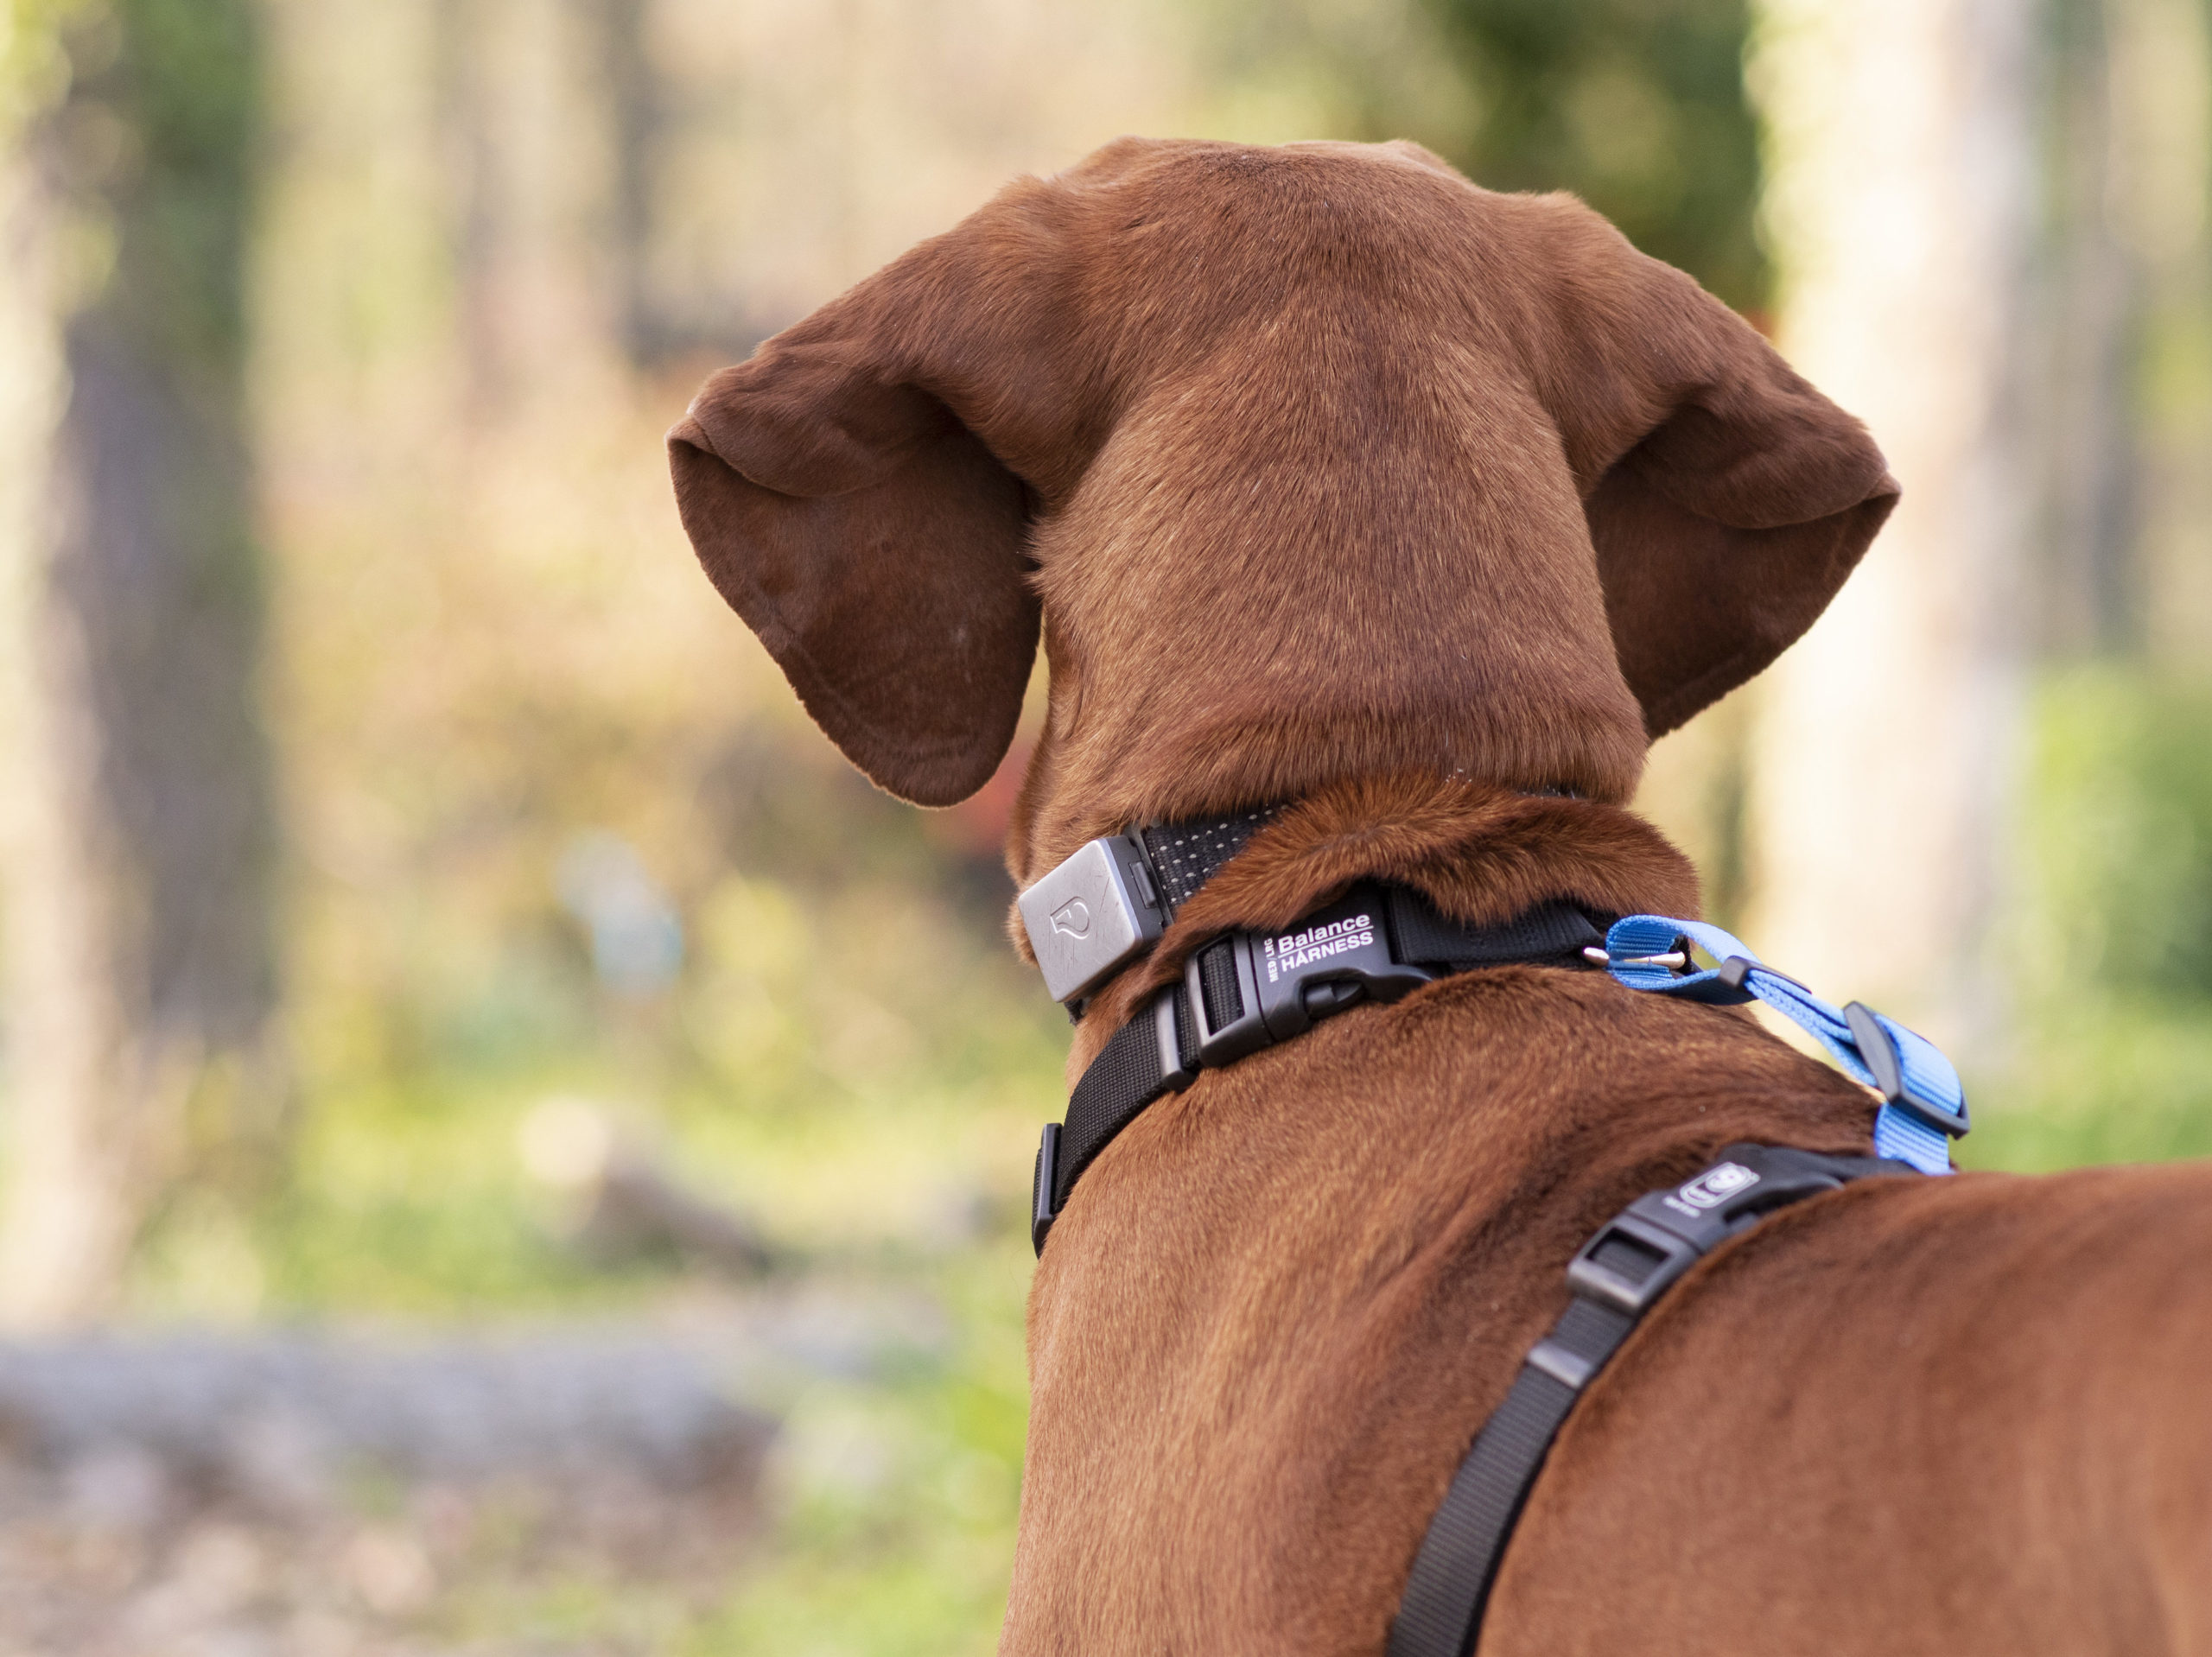 Shelby the redbone coonhound pictured wearing the blue-9 harness which we're reviewing, and the whistle switch collar